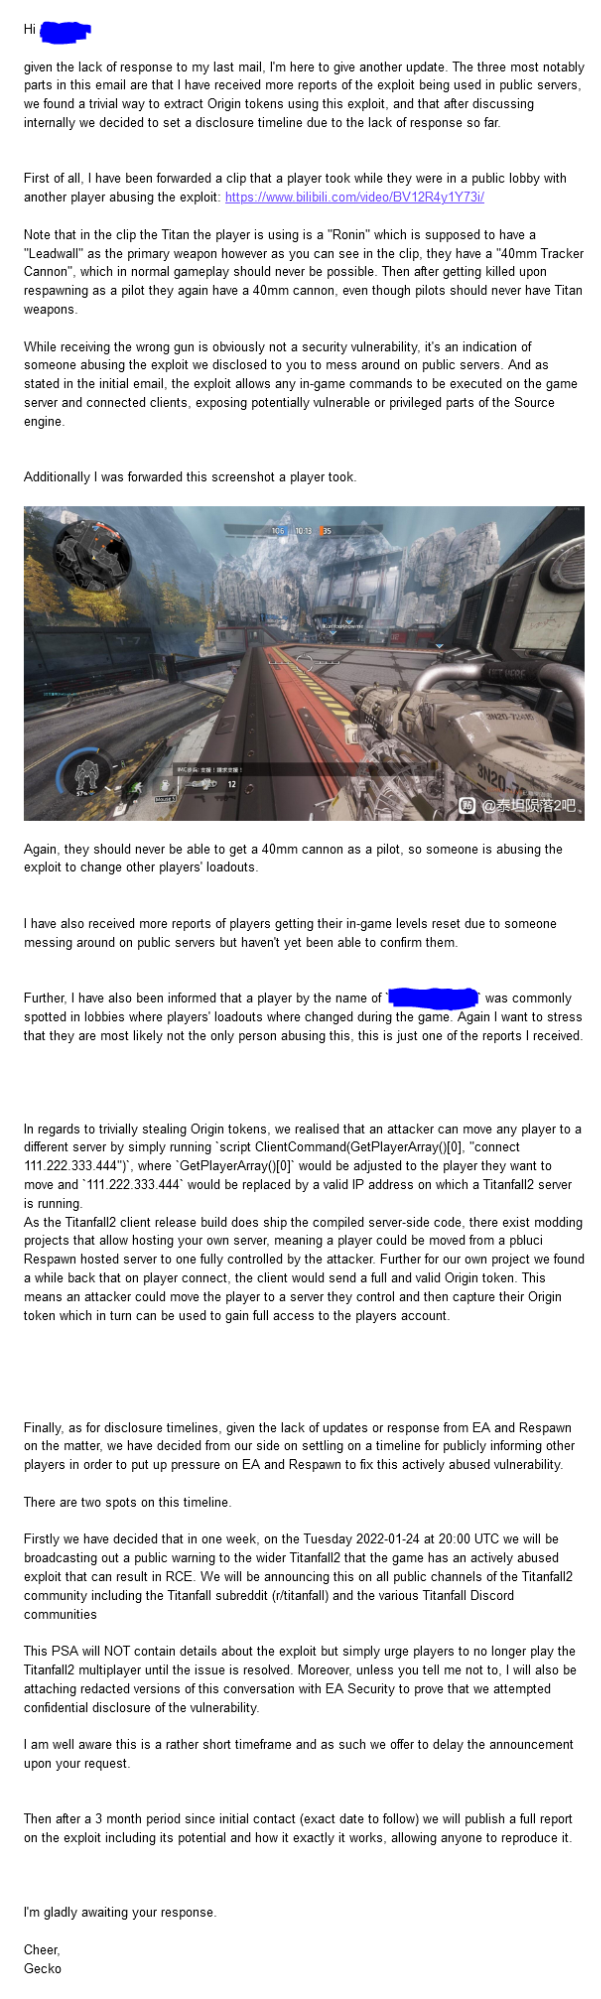 Screenshot of an email we sent to EA Security due to lack of response on their side.